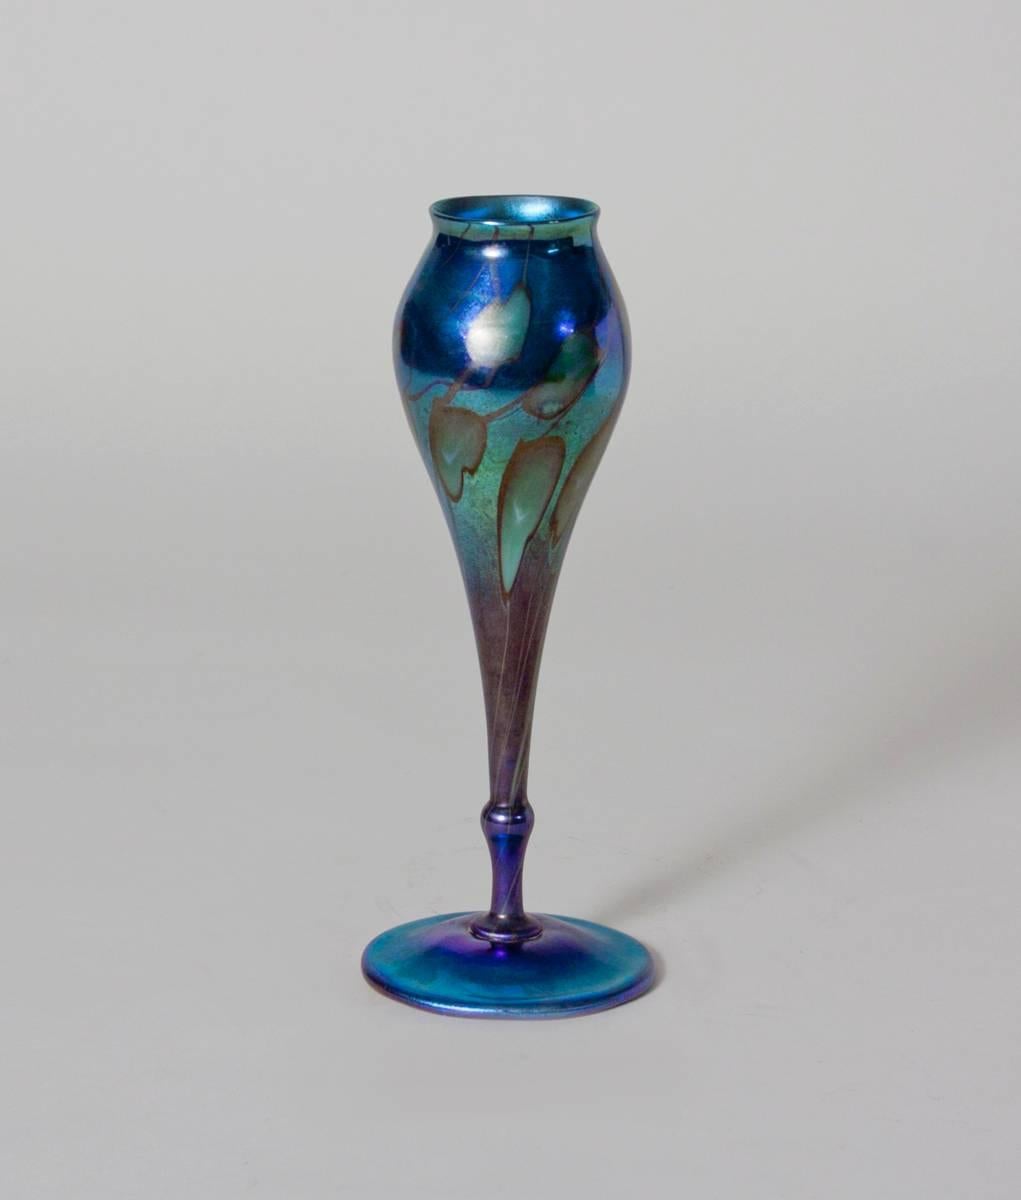 A Tiffany Studios Favrile Glass Flower Form Vase comprising an elongated form in a deep iridescent blue decorated with leaves and vines, signed.